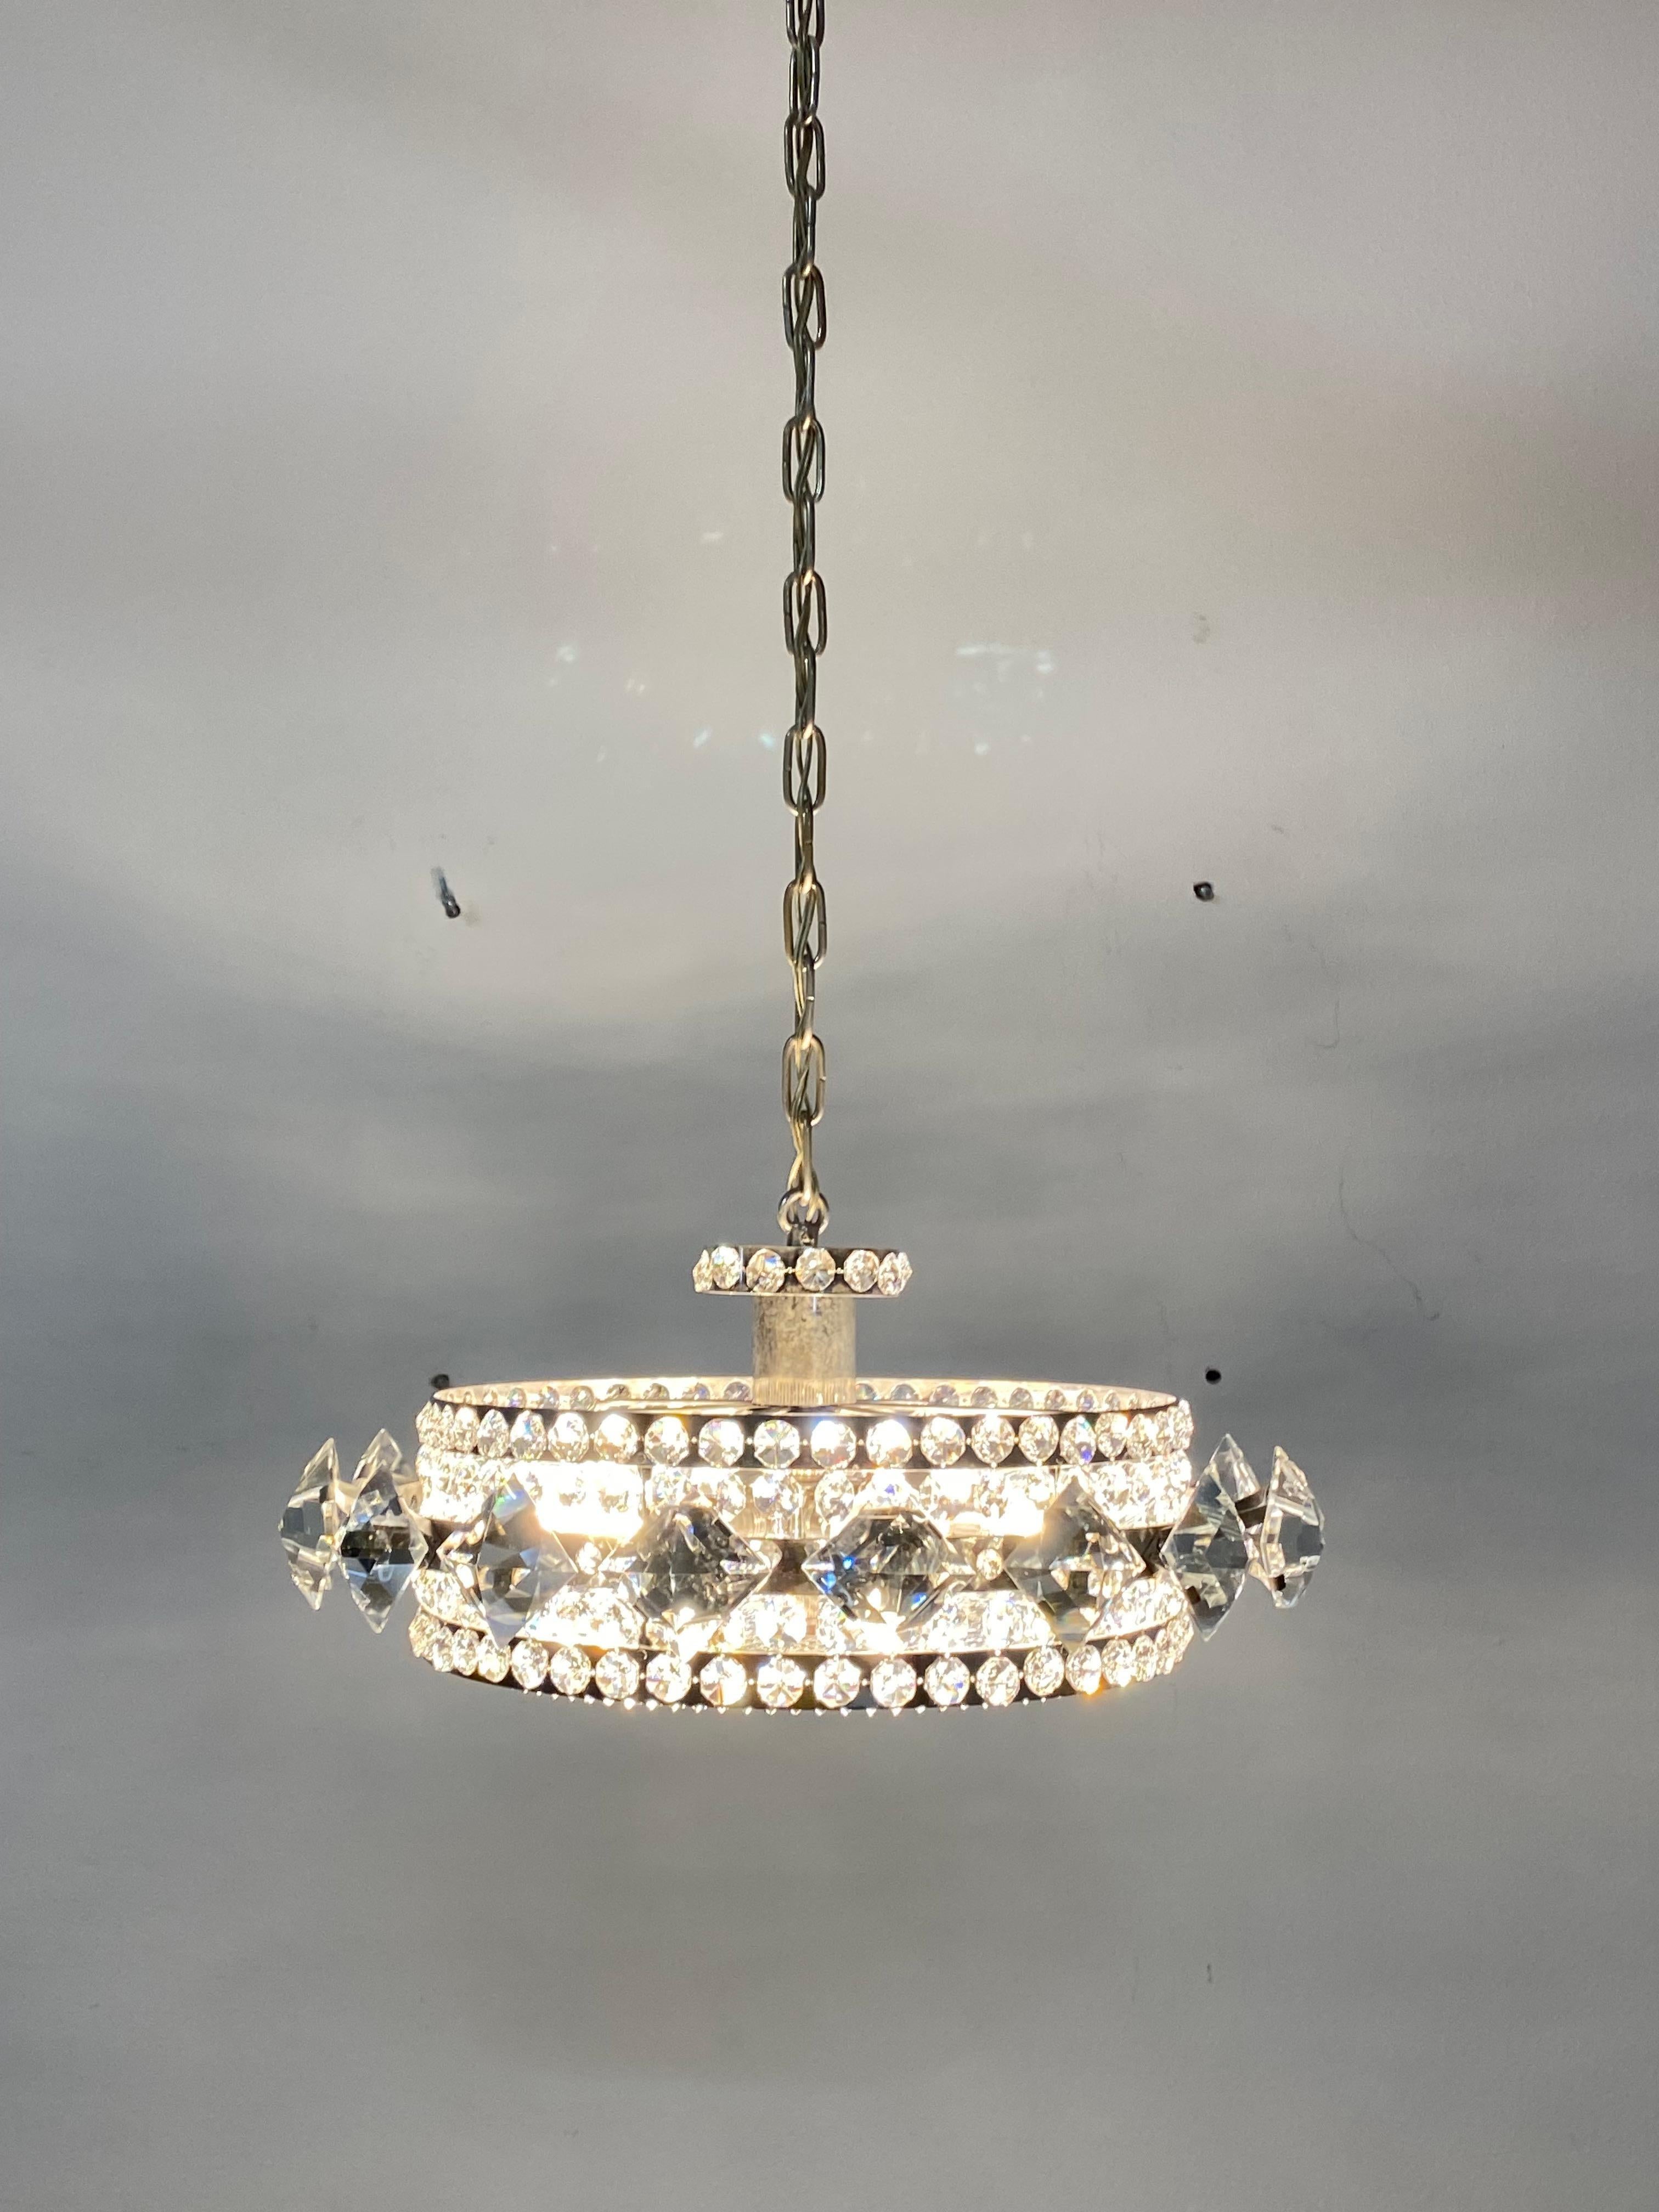 Chromed Brass and Glass Chandelier by Orrefors from the 1960s For Sale 3